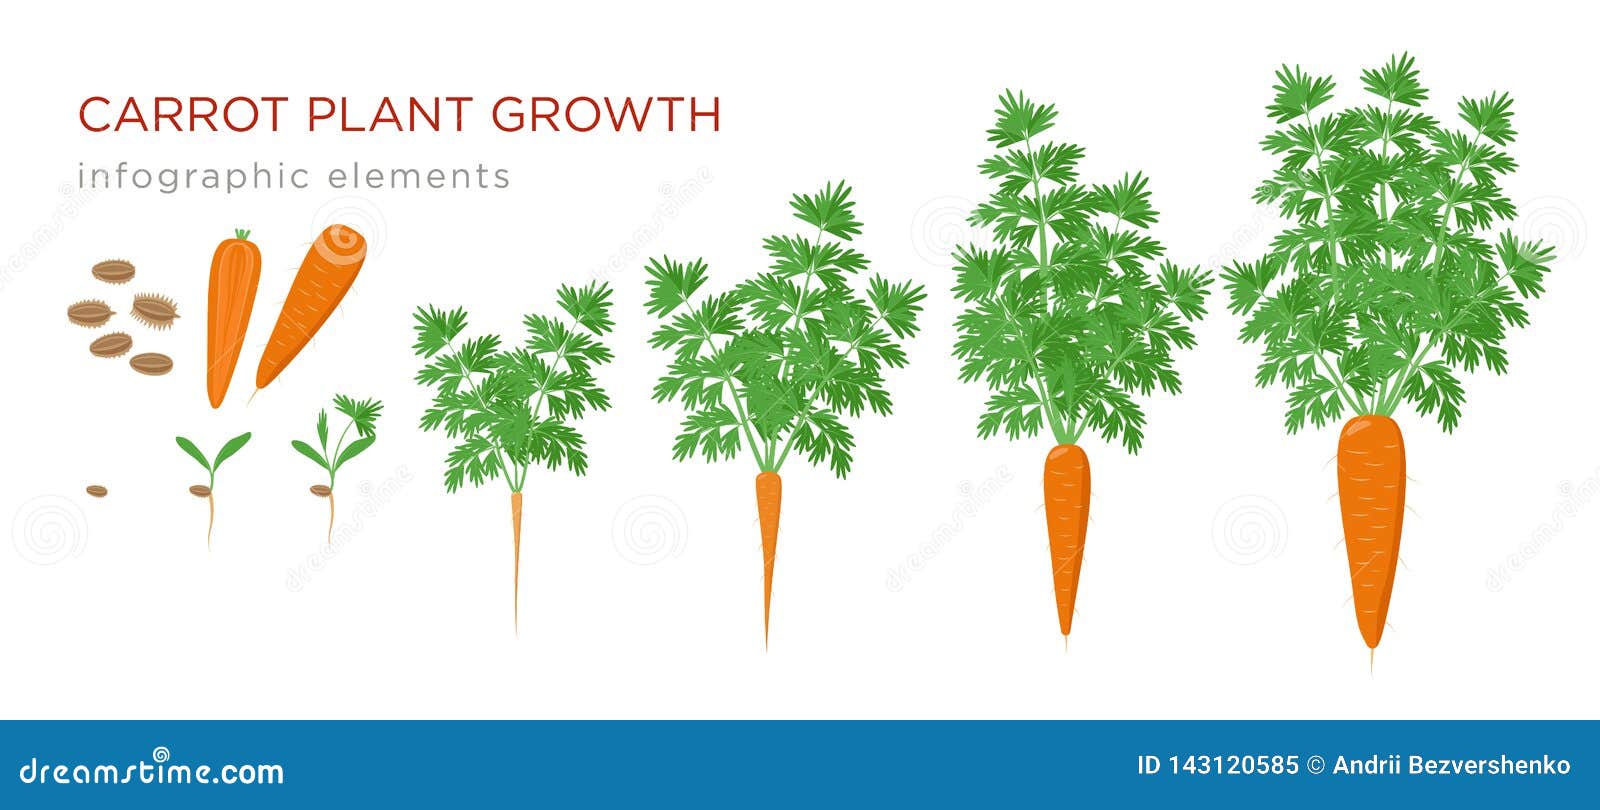 Carrot Plant Growth Stages Infographic Elements. Growing Process of ...